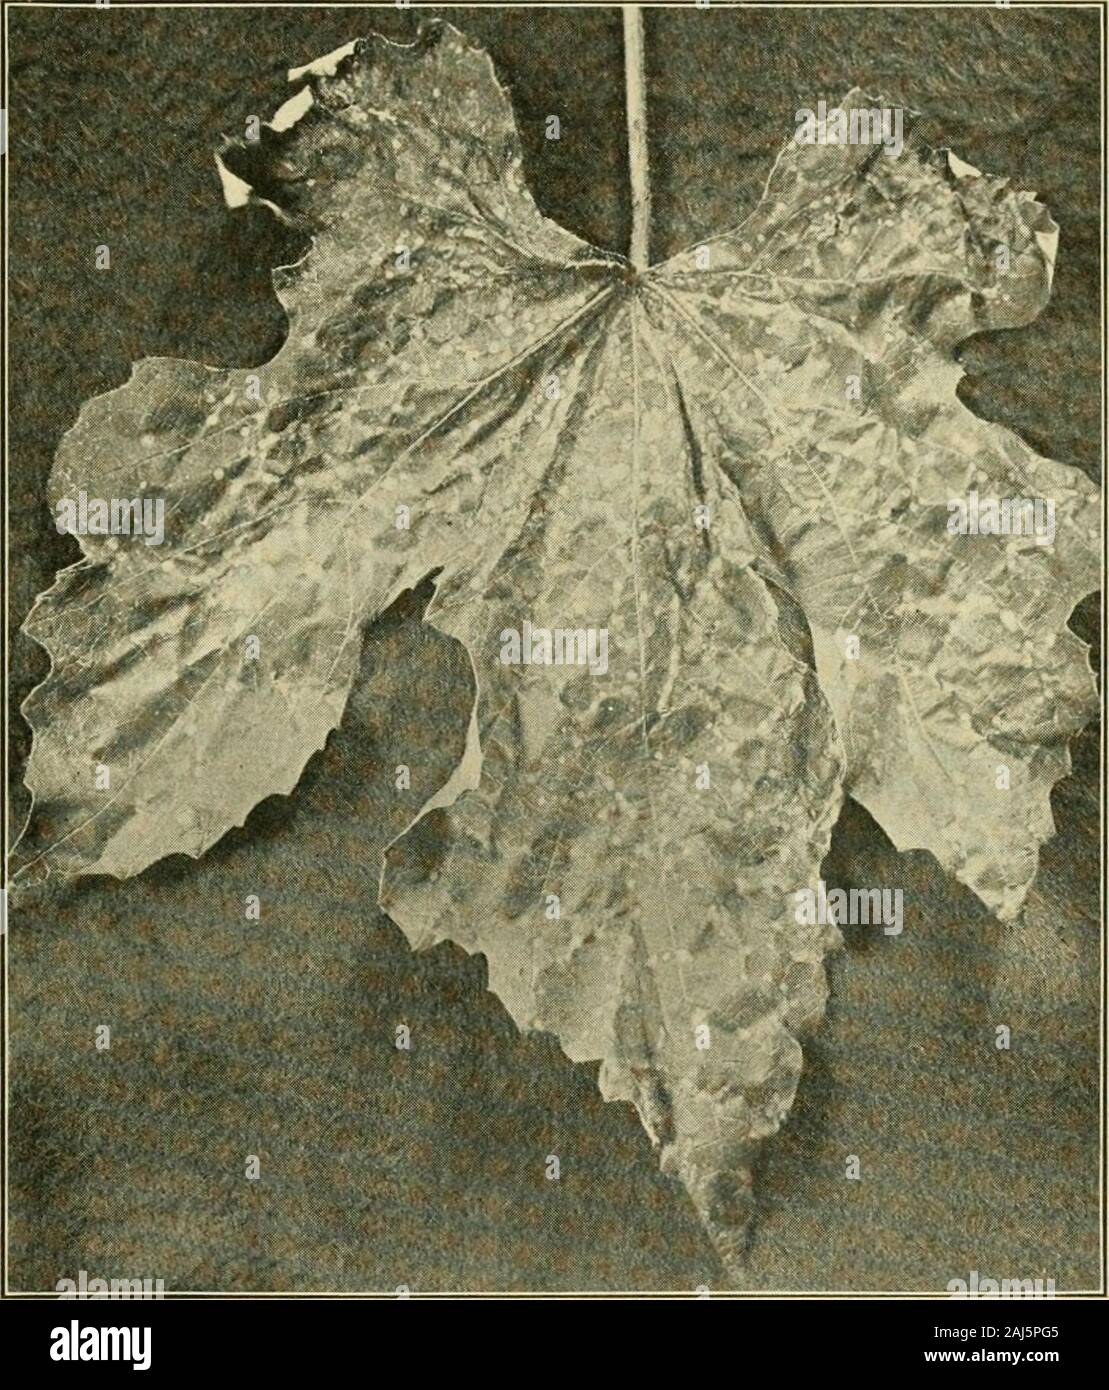 Fungous diseases of plants . Fig. no. Grapes affected i5Y Black Rot(Photograph by F. C. Stewart) i ASCOMYCETES 257 mass of mycelium which arises hencath the epidermis. It isbroadly elliptical, with a rather thick wall and no indication of abeak (Fig. 112, a). The conidiophores are short and simple, bear-ing spores — ovate or elliptical — measuring ordinarily 8—10 x 7-8/i. In moist weather the spores are pushed out in vermiform. Fig. III. Phyllosticta Stage of the Black Rot Fungus(Photograph by H. H. Whetzel) masses and upon dissemination they are capable of immediategermination. Accompanying t Stock Photo